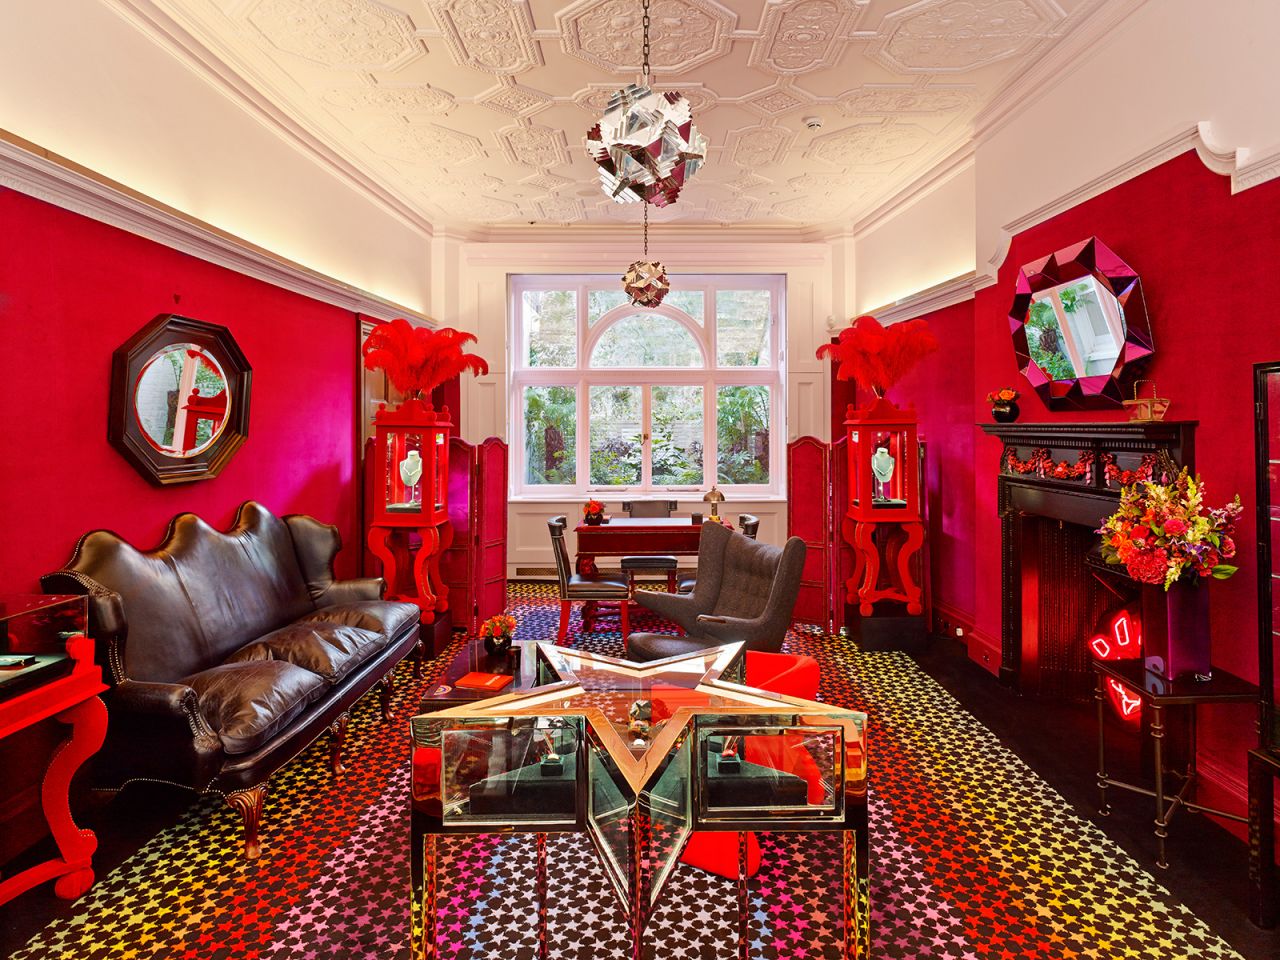 A view inside jewelry designer Solange Azagury-Partridge's boldly decorated cottage in Somerset, UK.